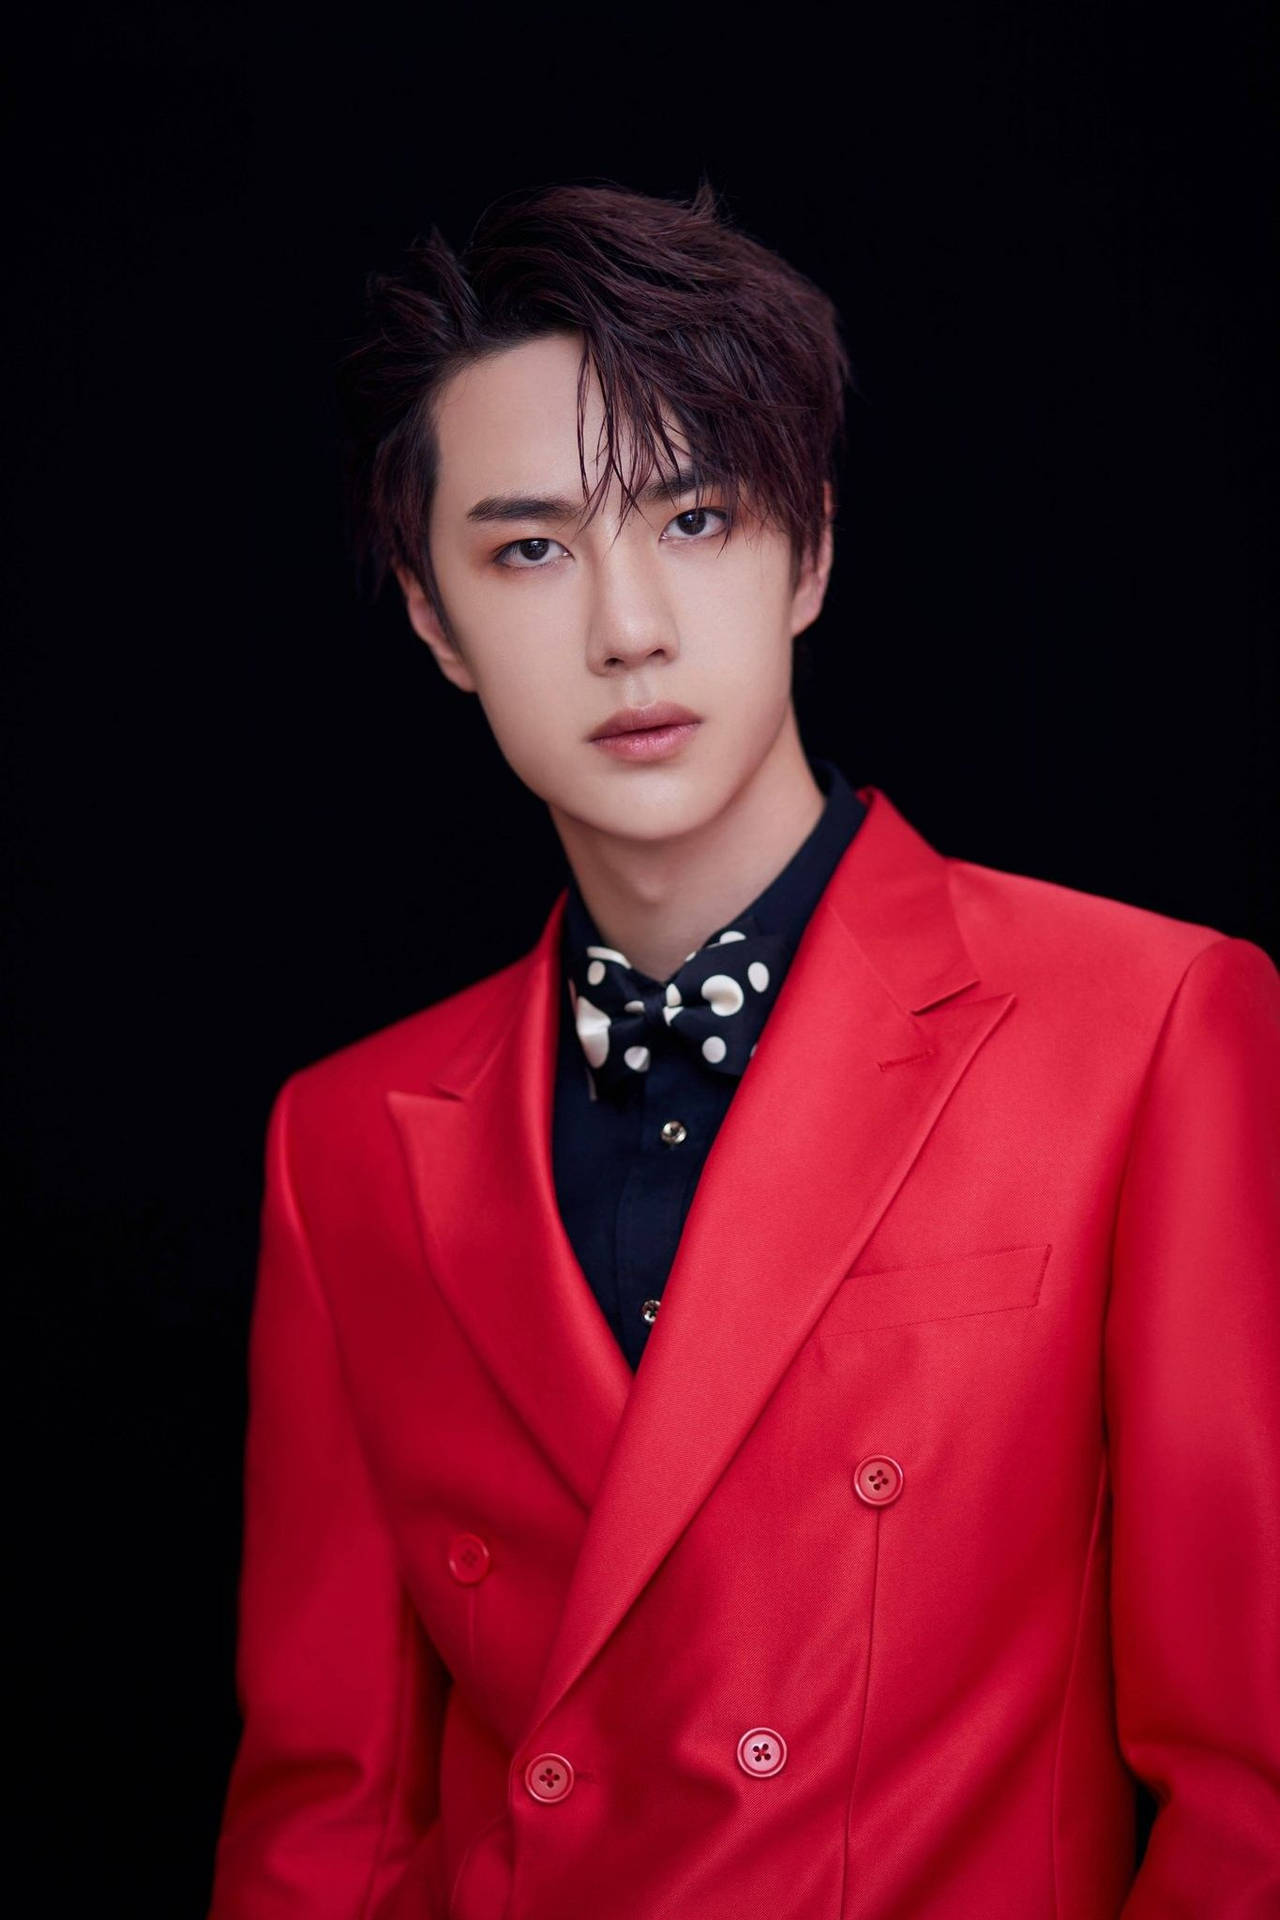 Chinese Actor Wang Yibo in a stunning red outfit on the set of Produce 101. Wallpaper